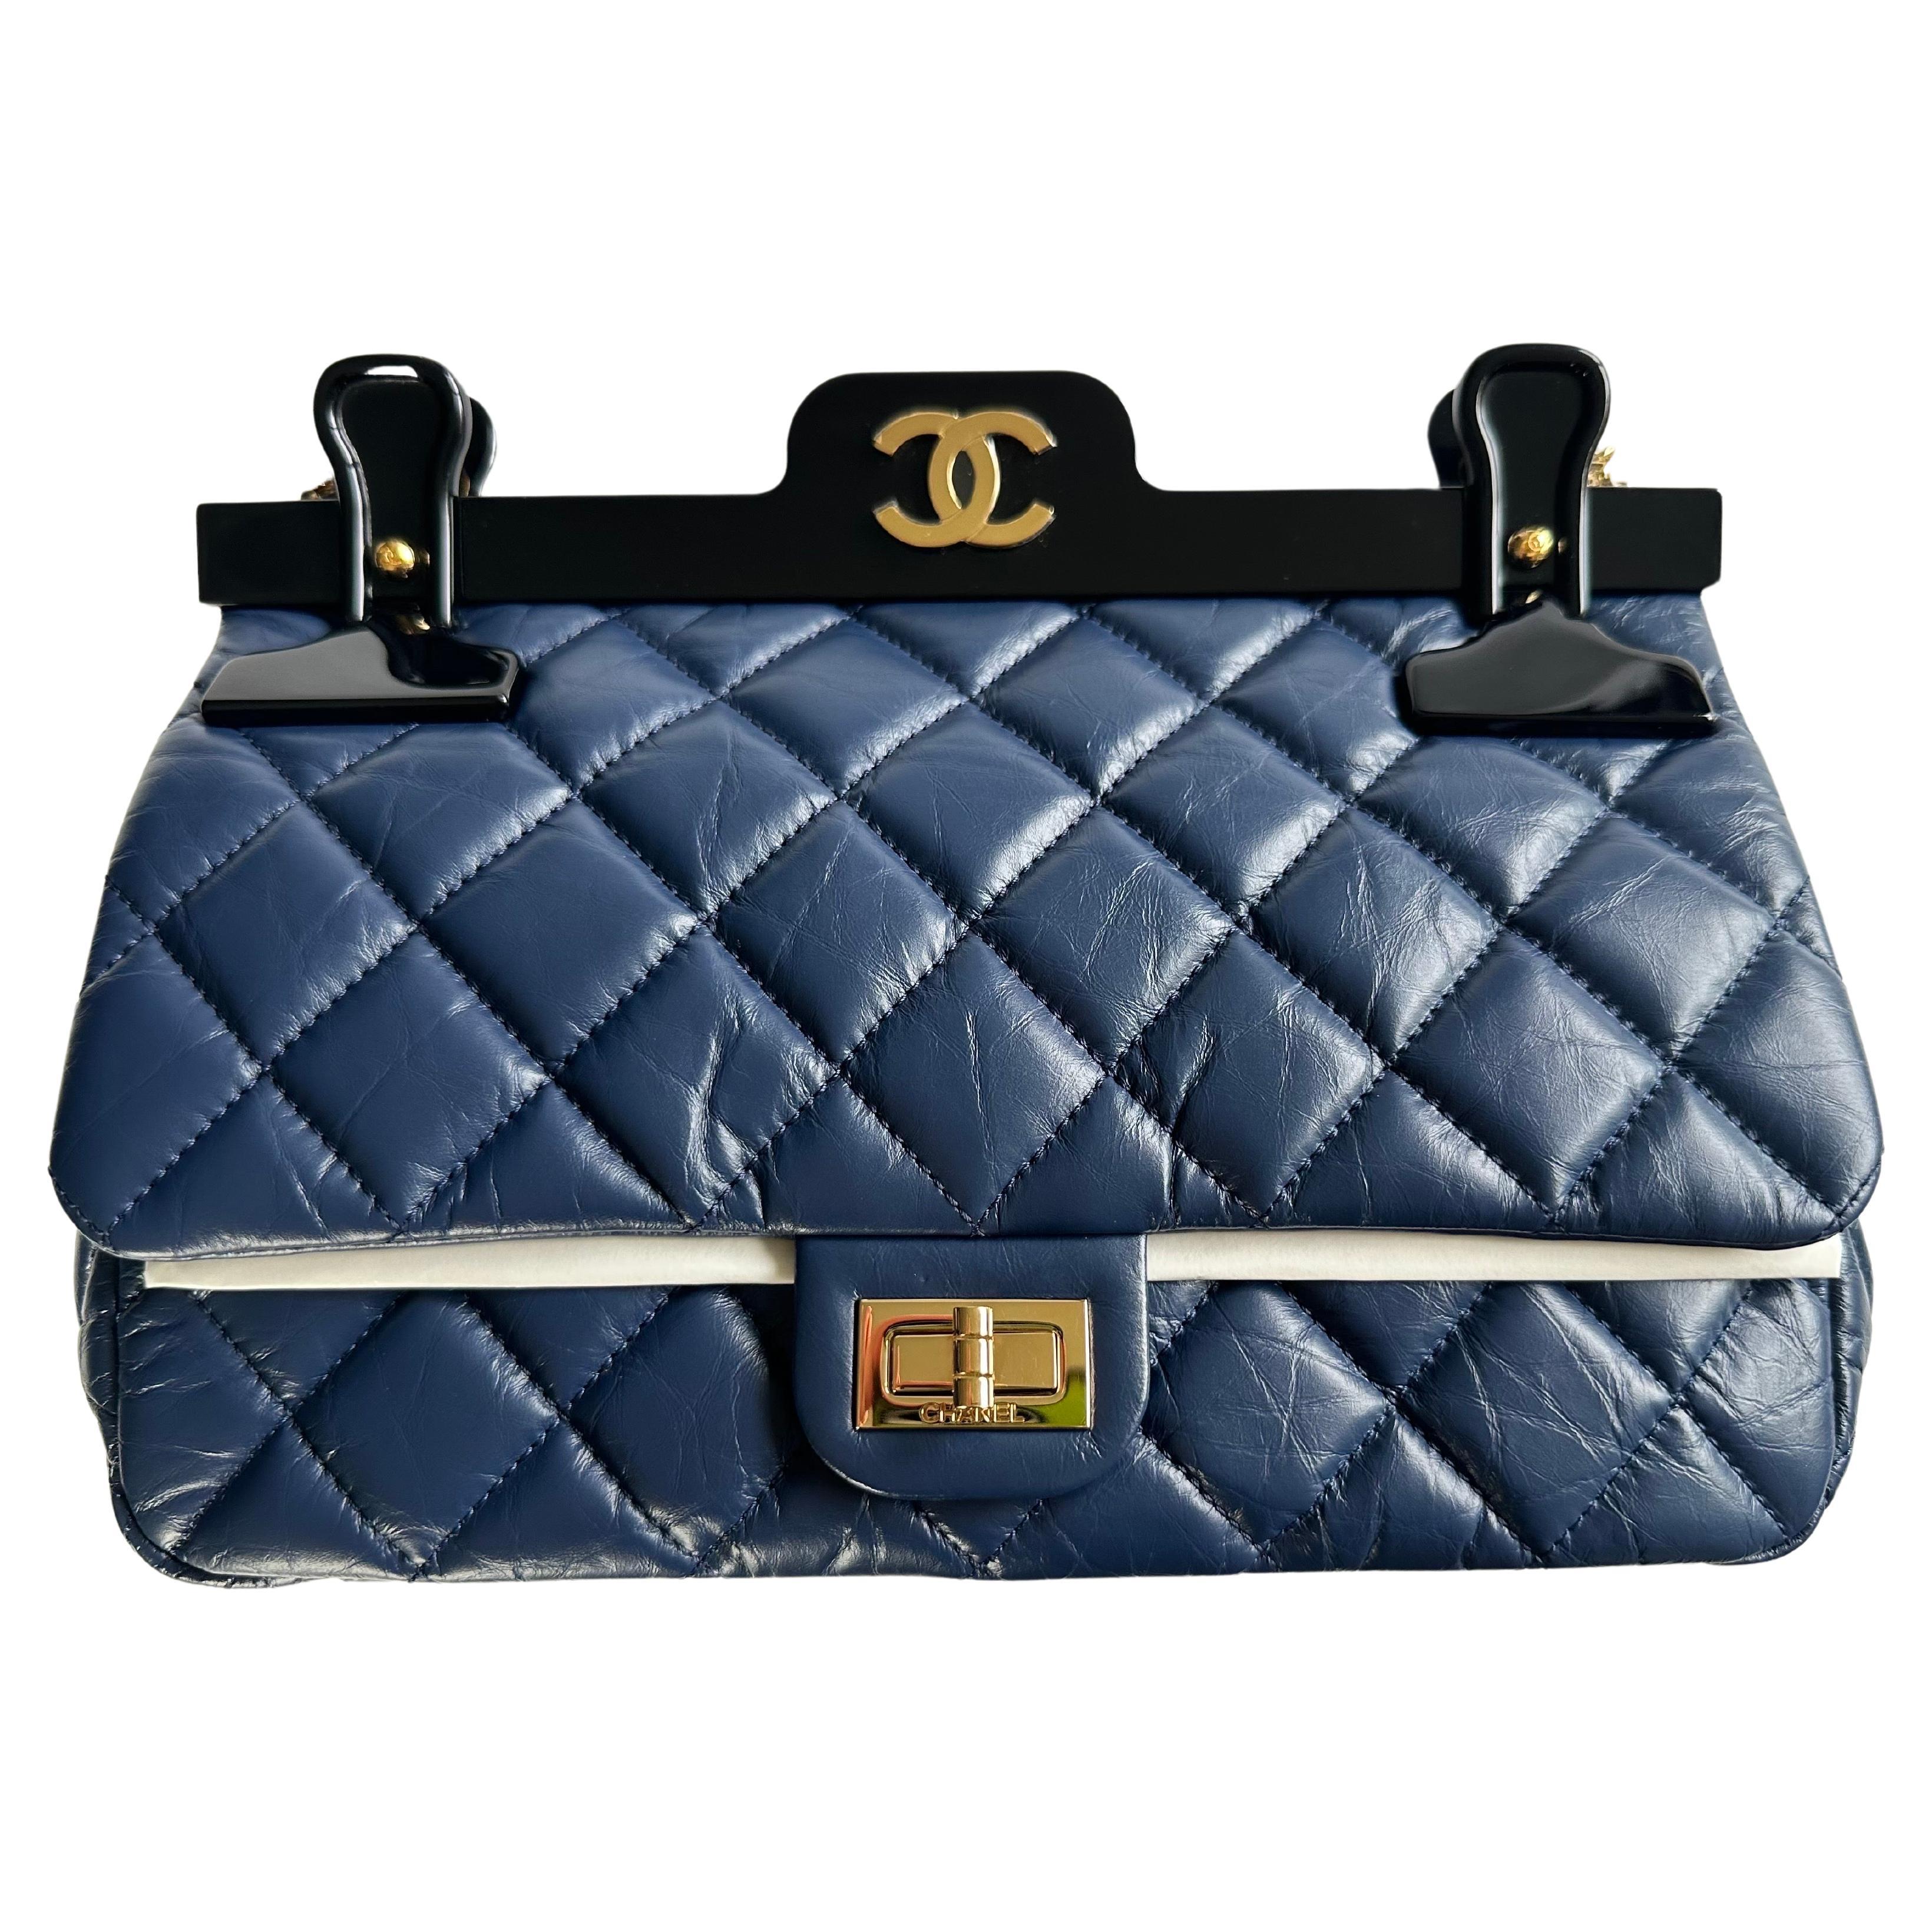 Chanel 2016 Limited Editiion 2.55 Reissue Rare Hanger Navy Blue Classic Flap Bag